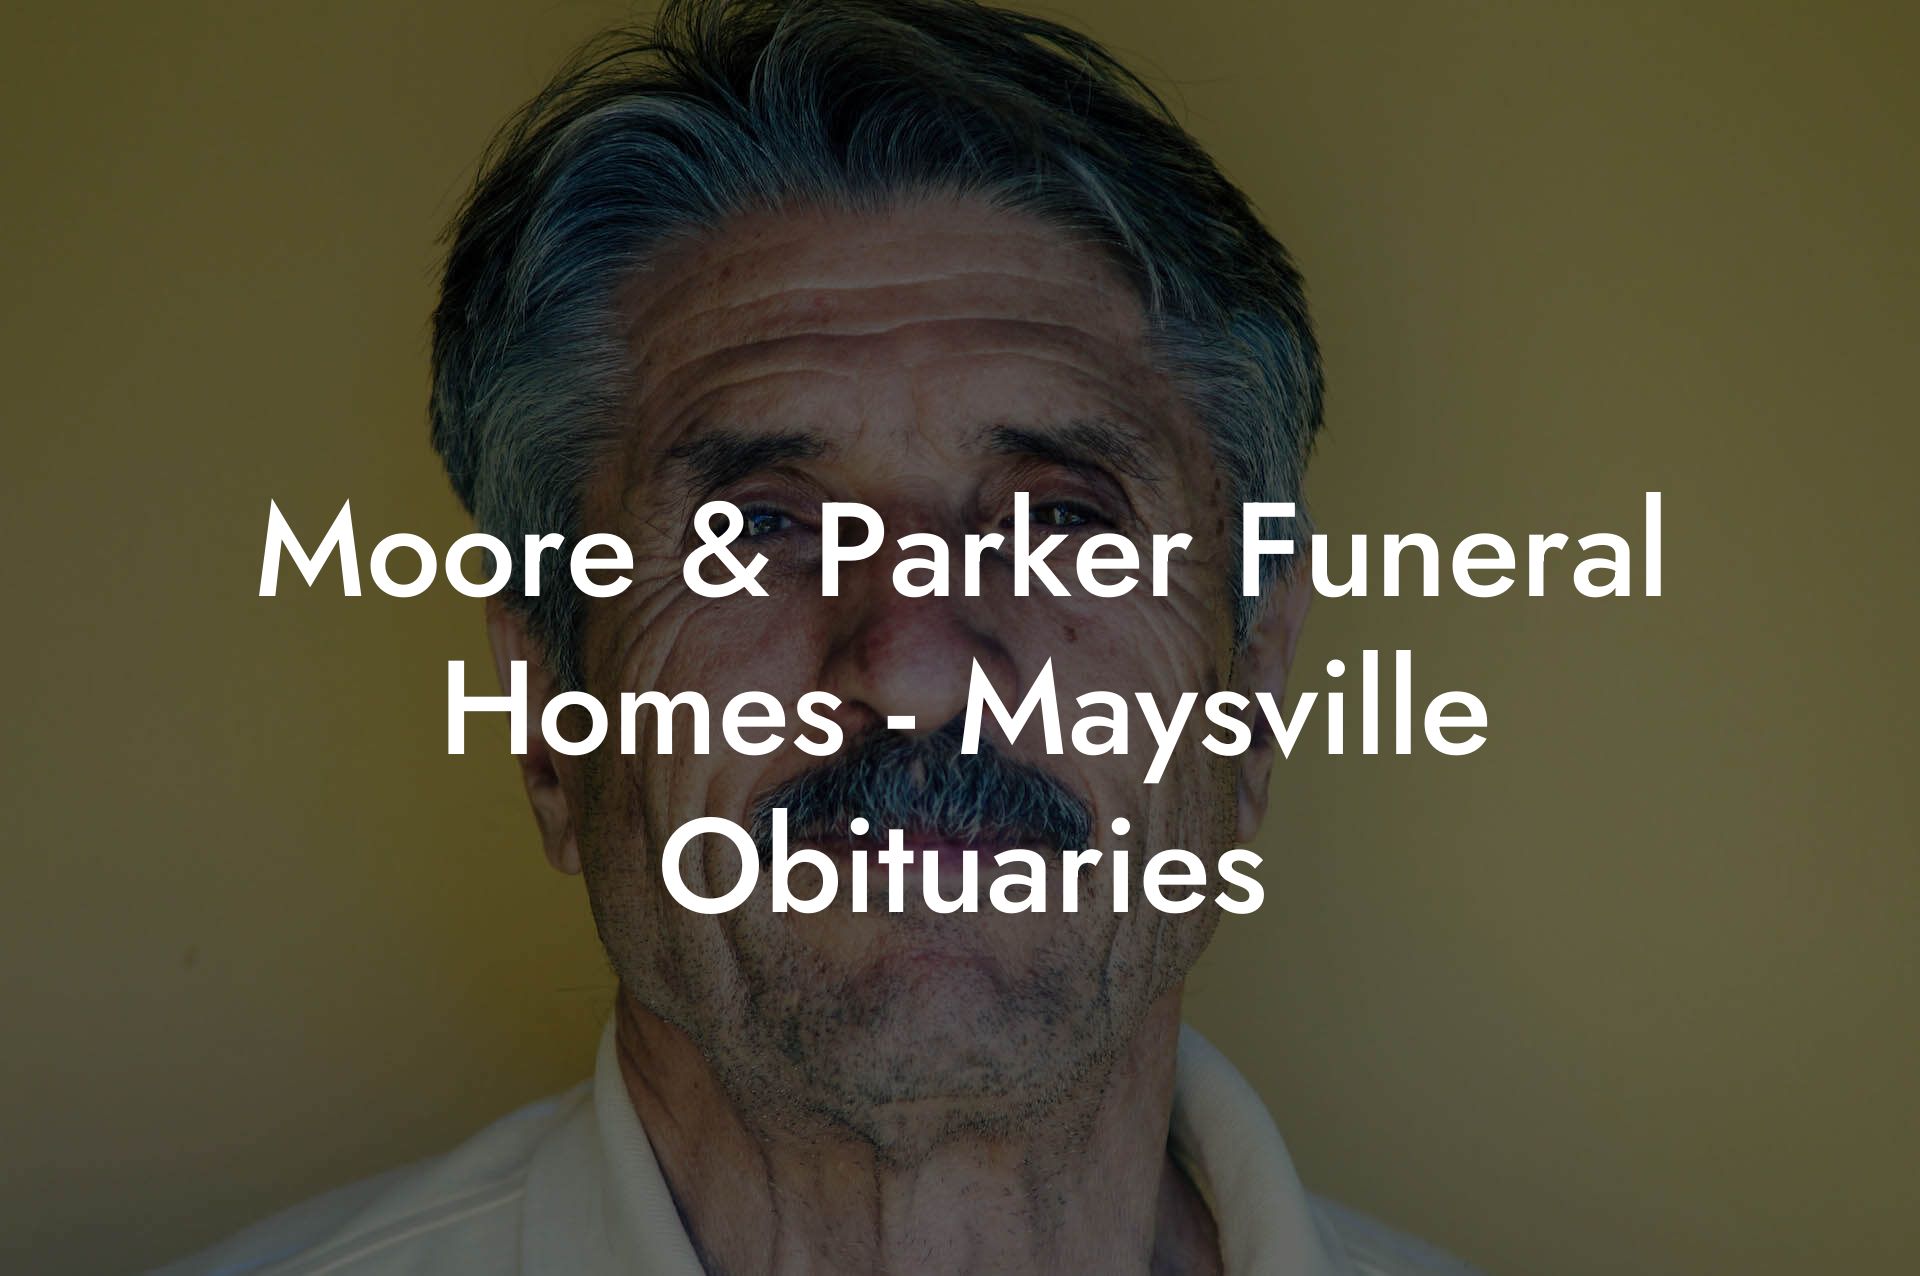 Moore & Parker Funeral Homes - Maysville Obituaries